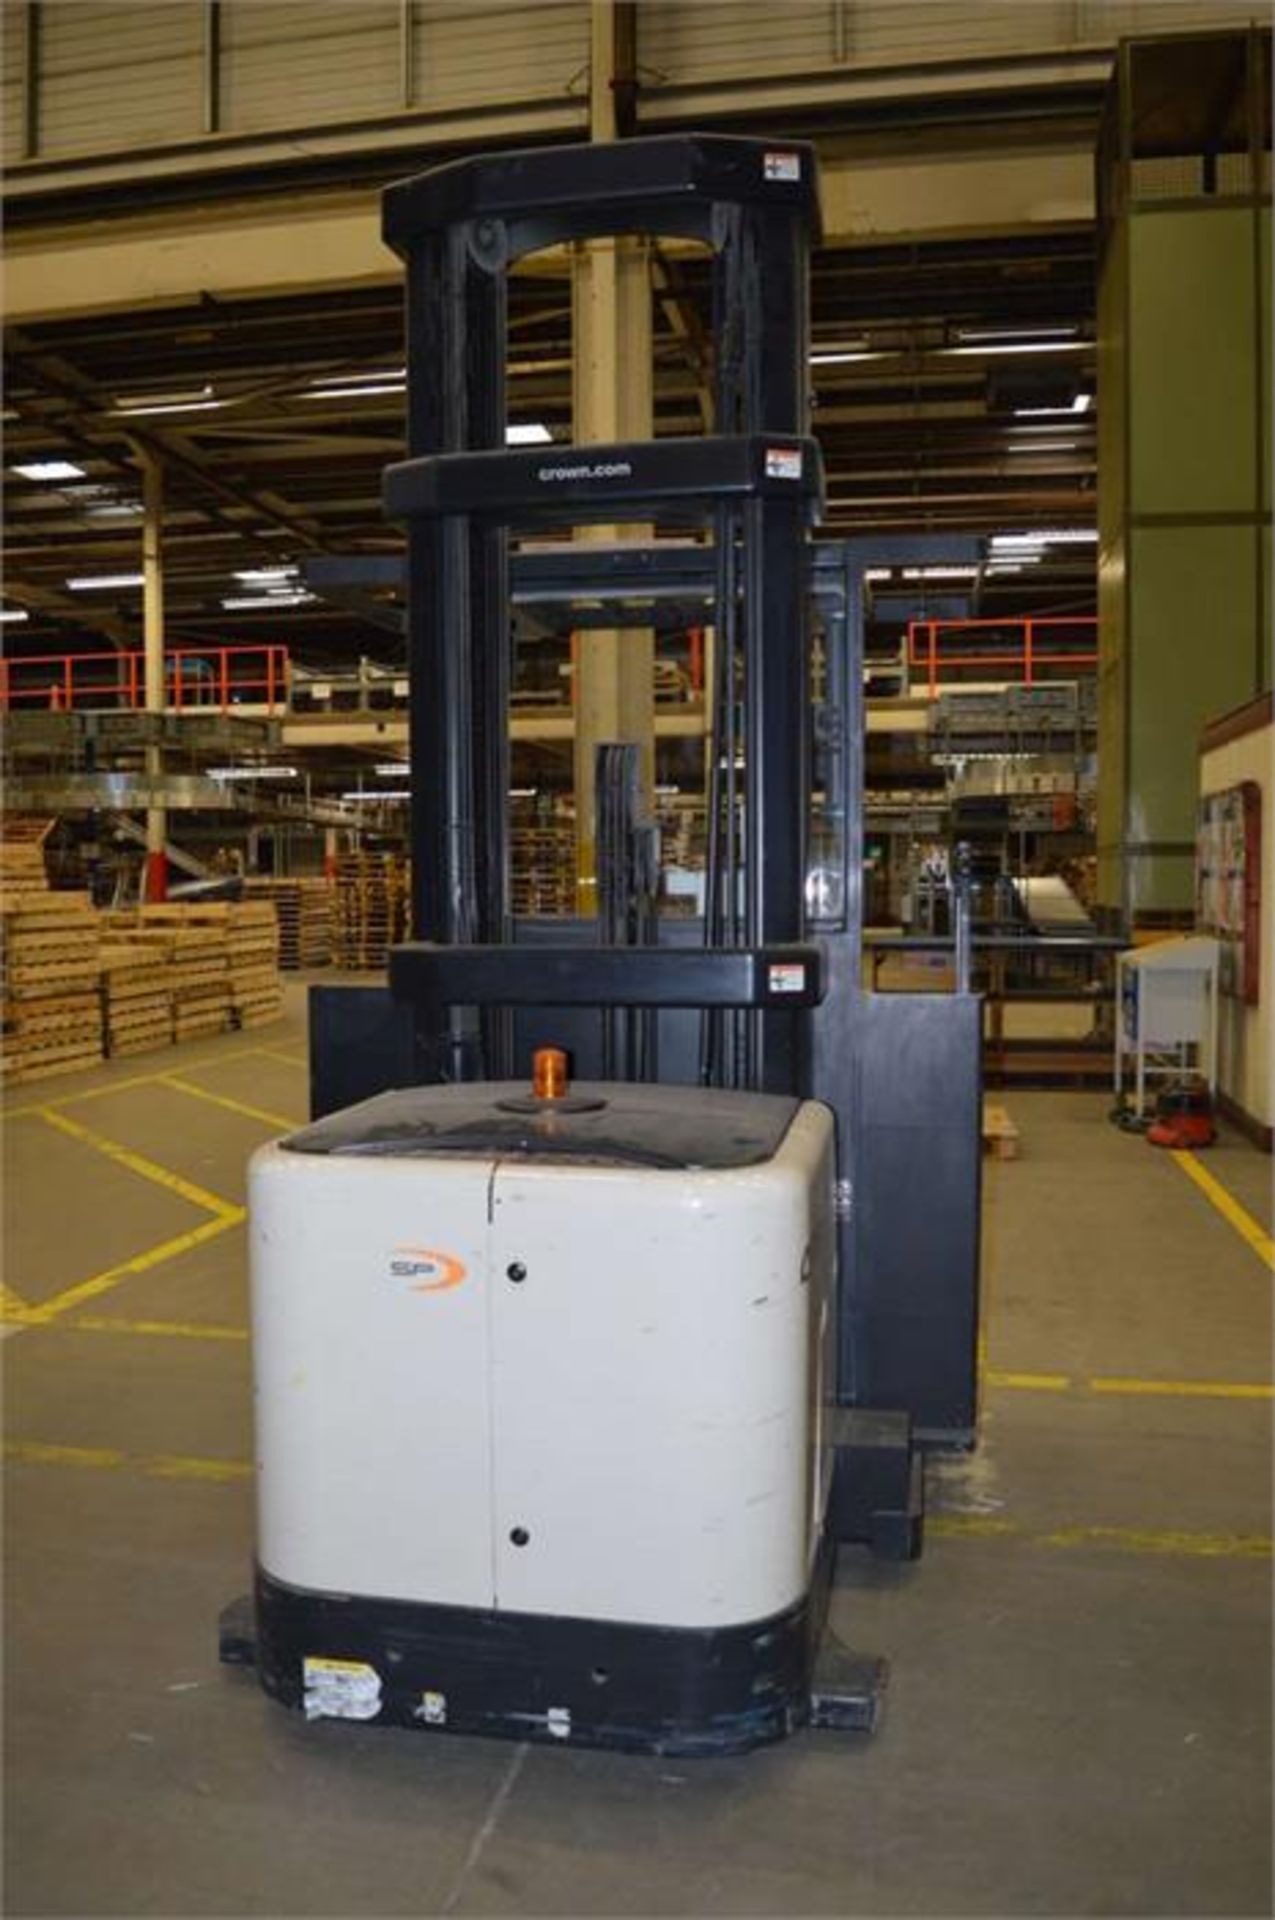 Crown, SP3500 Series, Model: SP3522-1.0, 1000kg electric high level order picker, Serial No. - Image 4 of 5